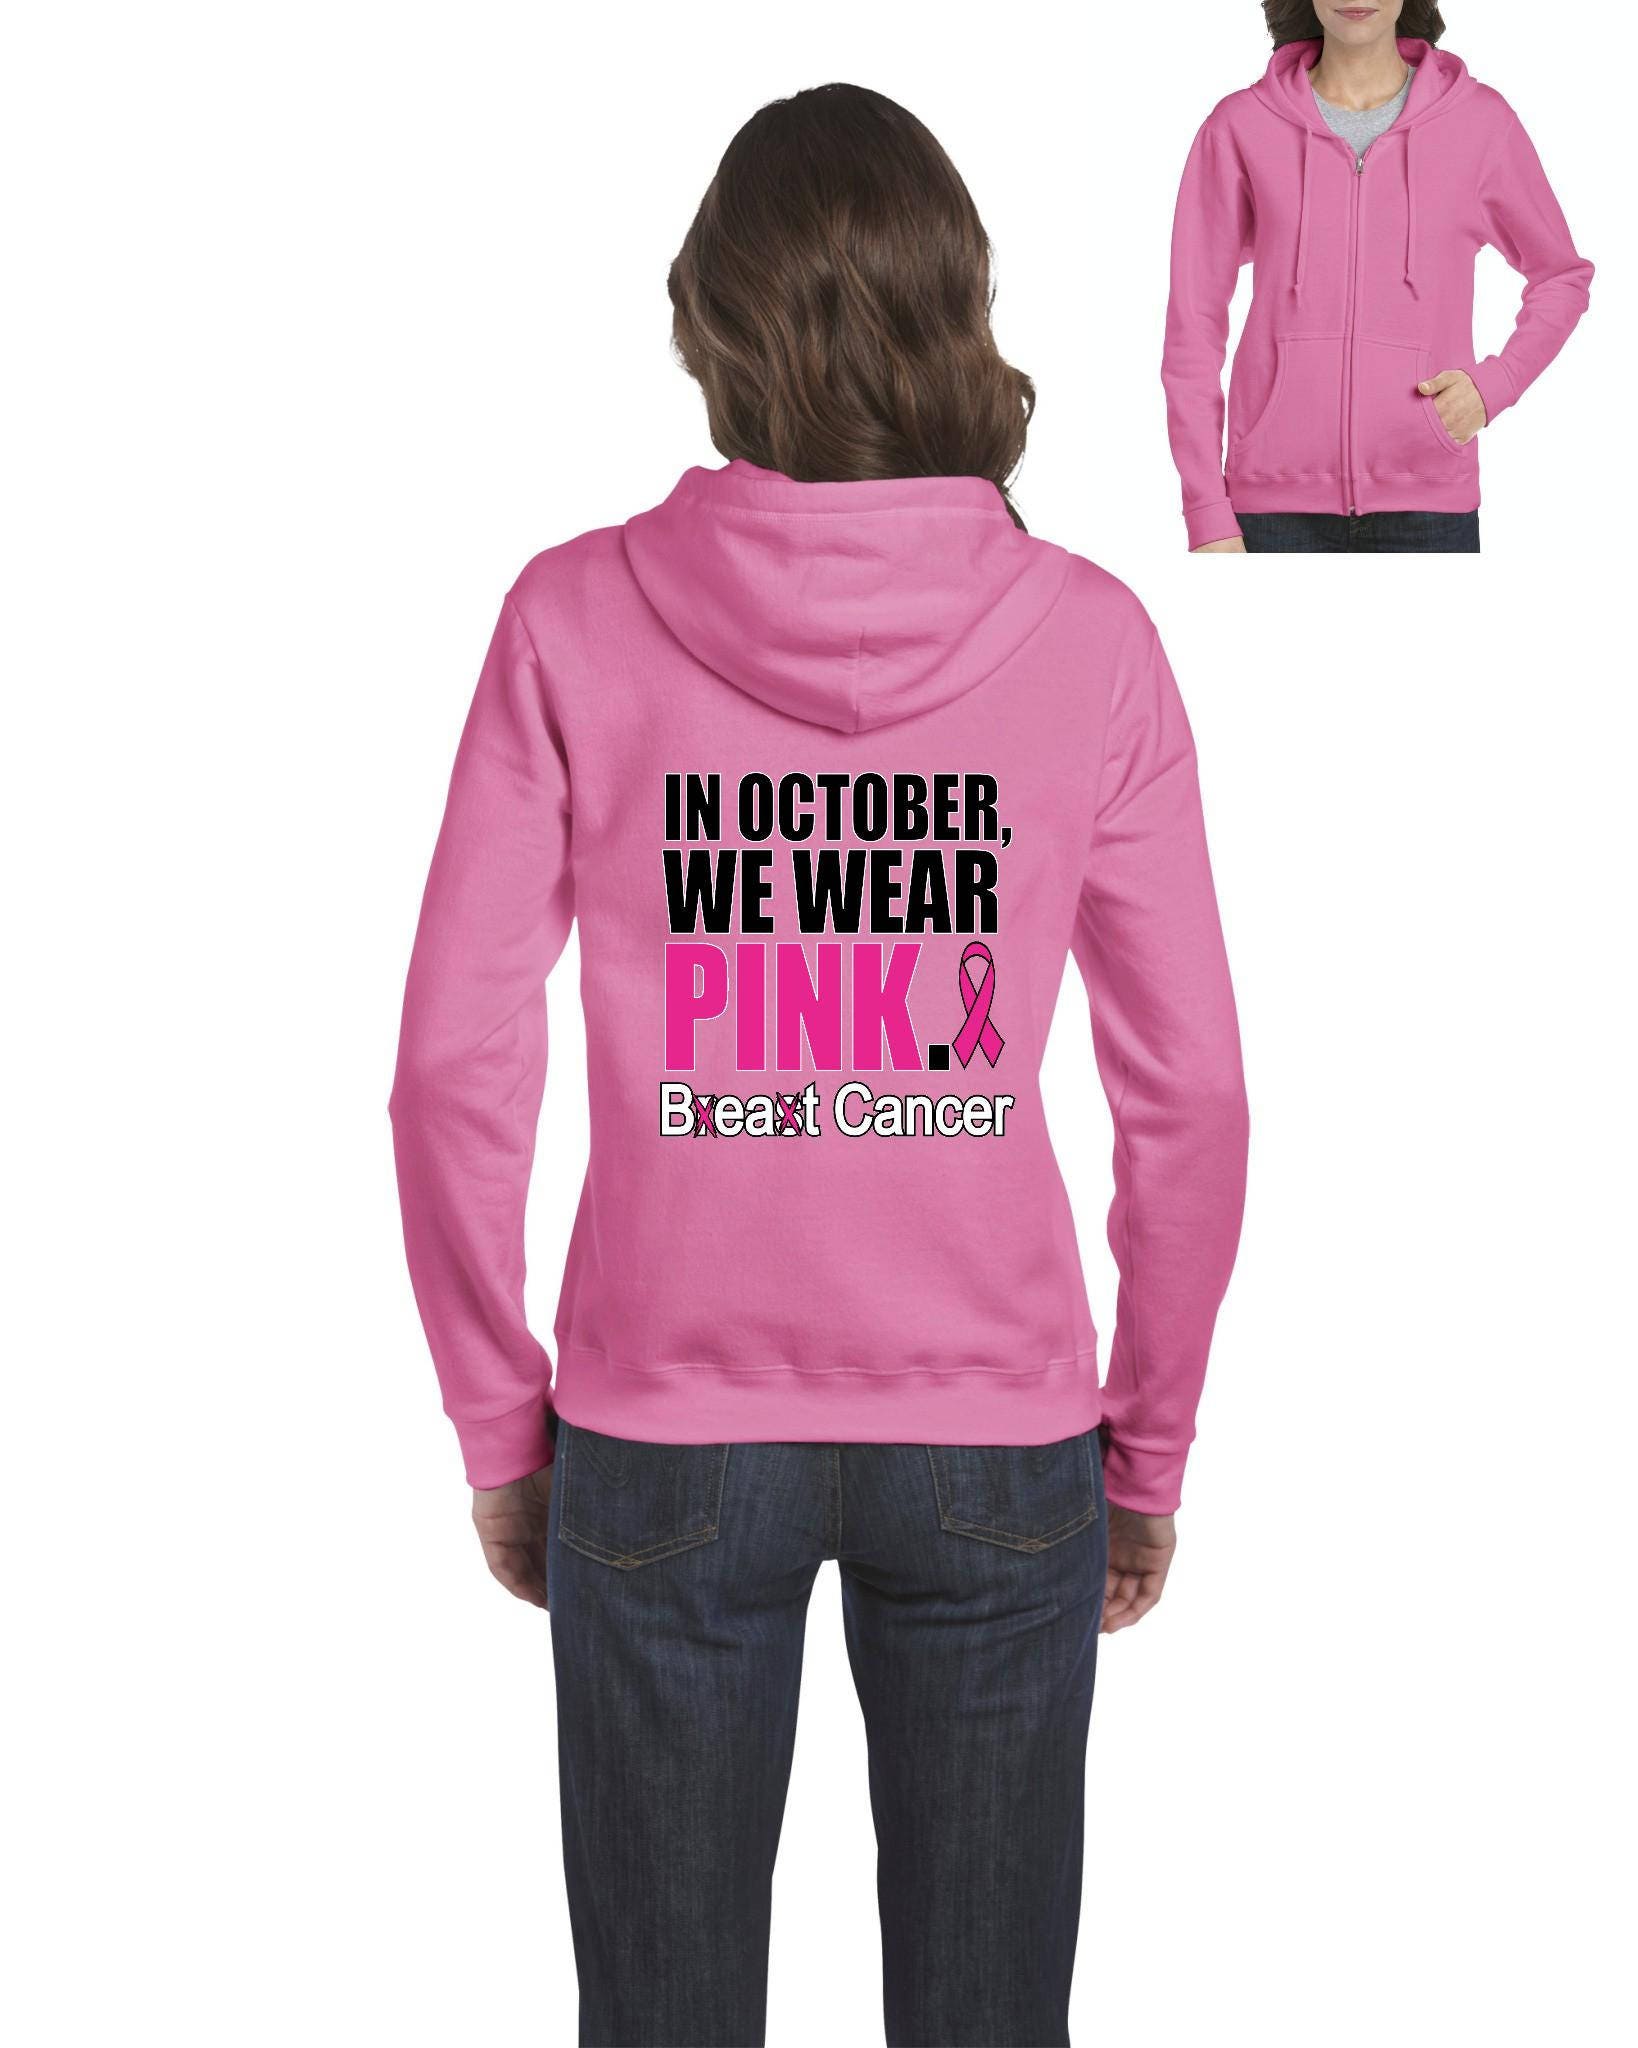  Breast Cancer Pink Ribbon Men's Zip Up Hoodie Lightweight Long  Sleeve Hooded Sweatshirt Jacket with Pockets : Clothing, Shoes & Jewelry